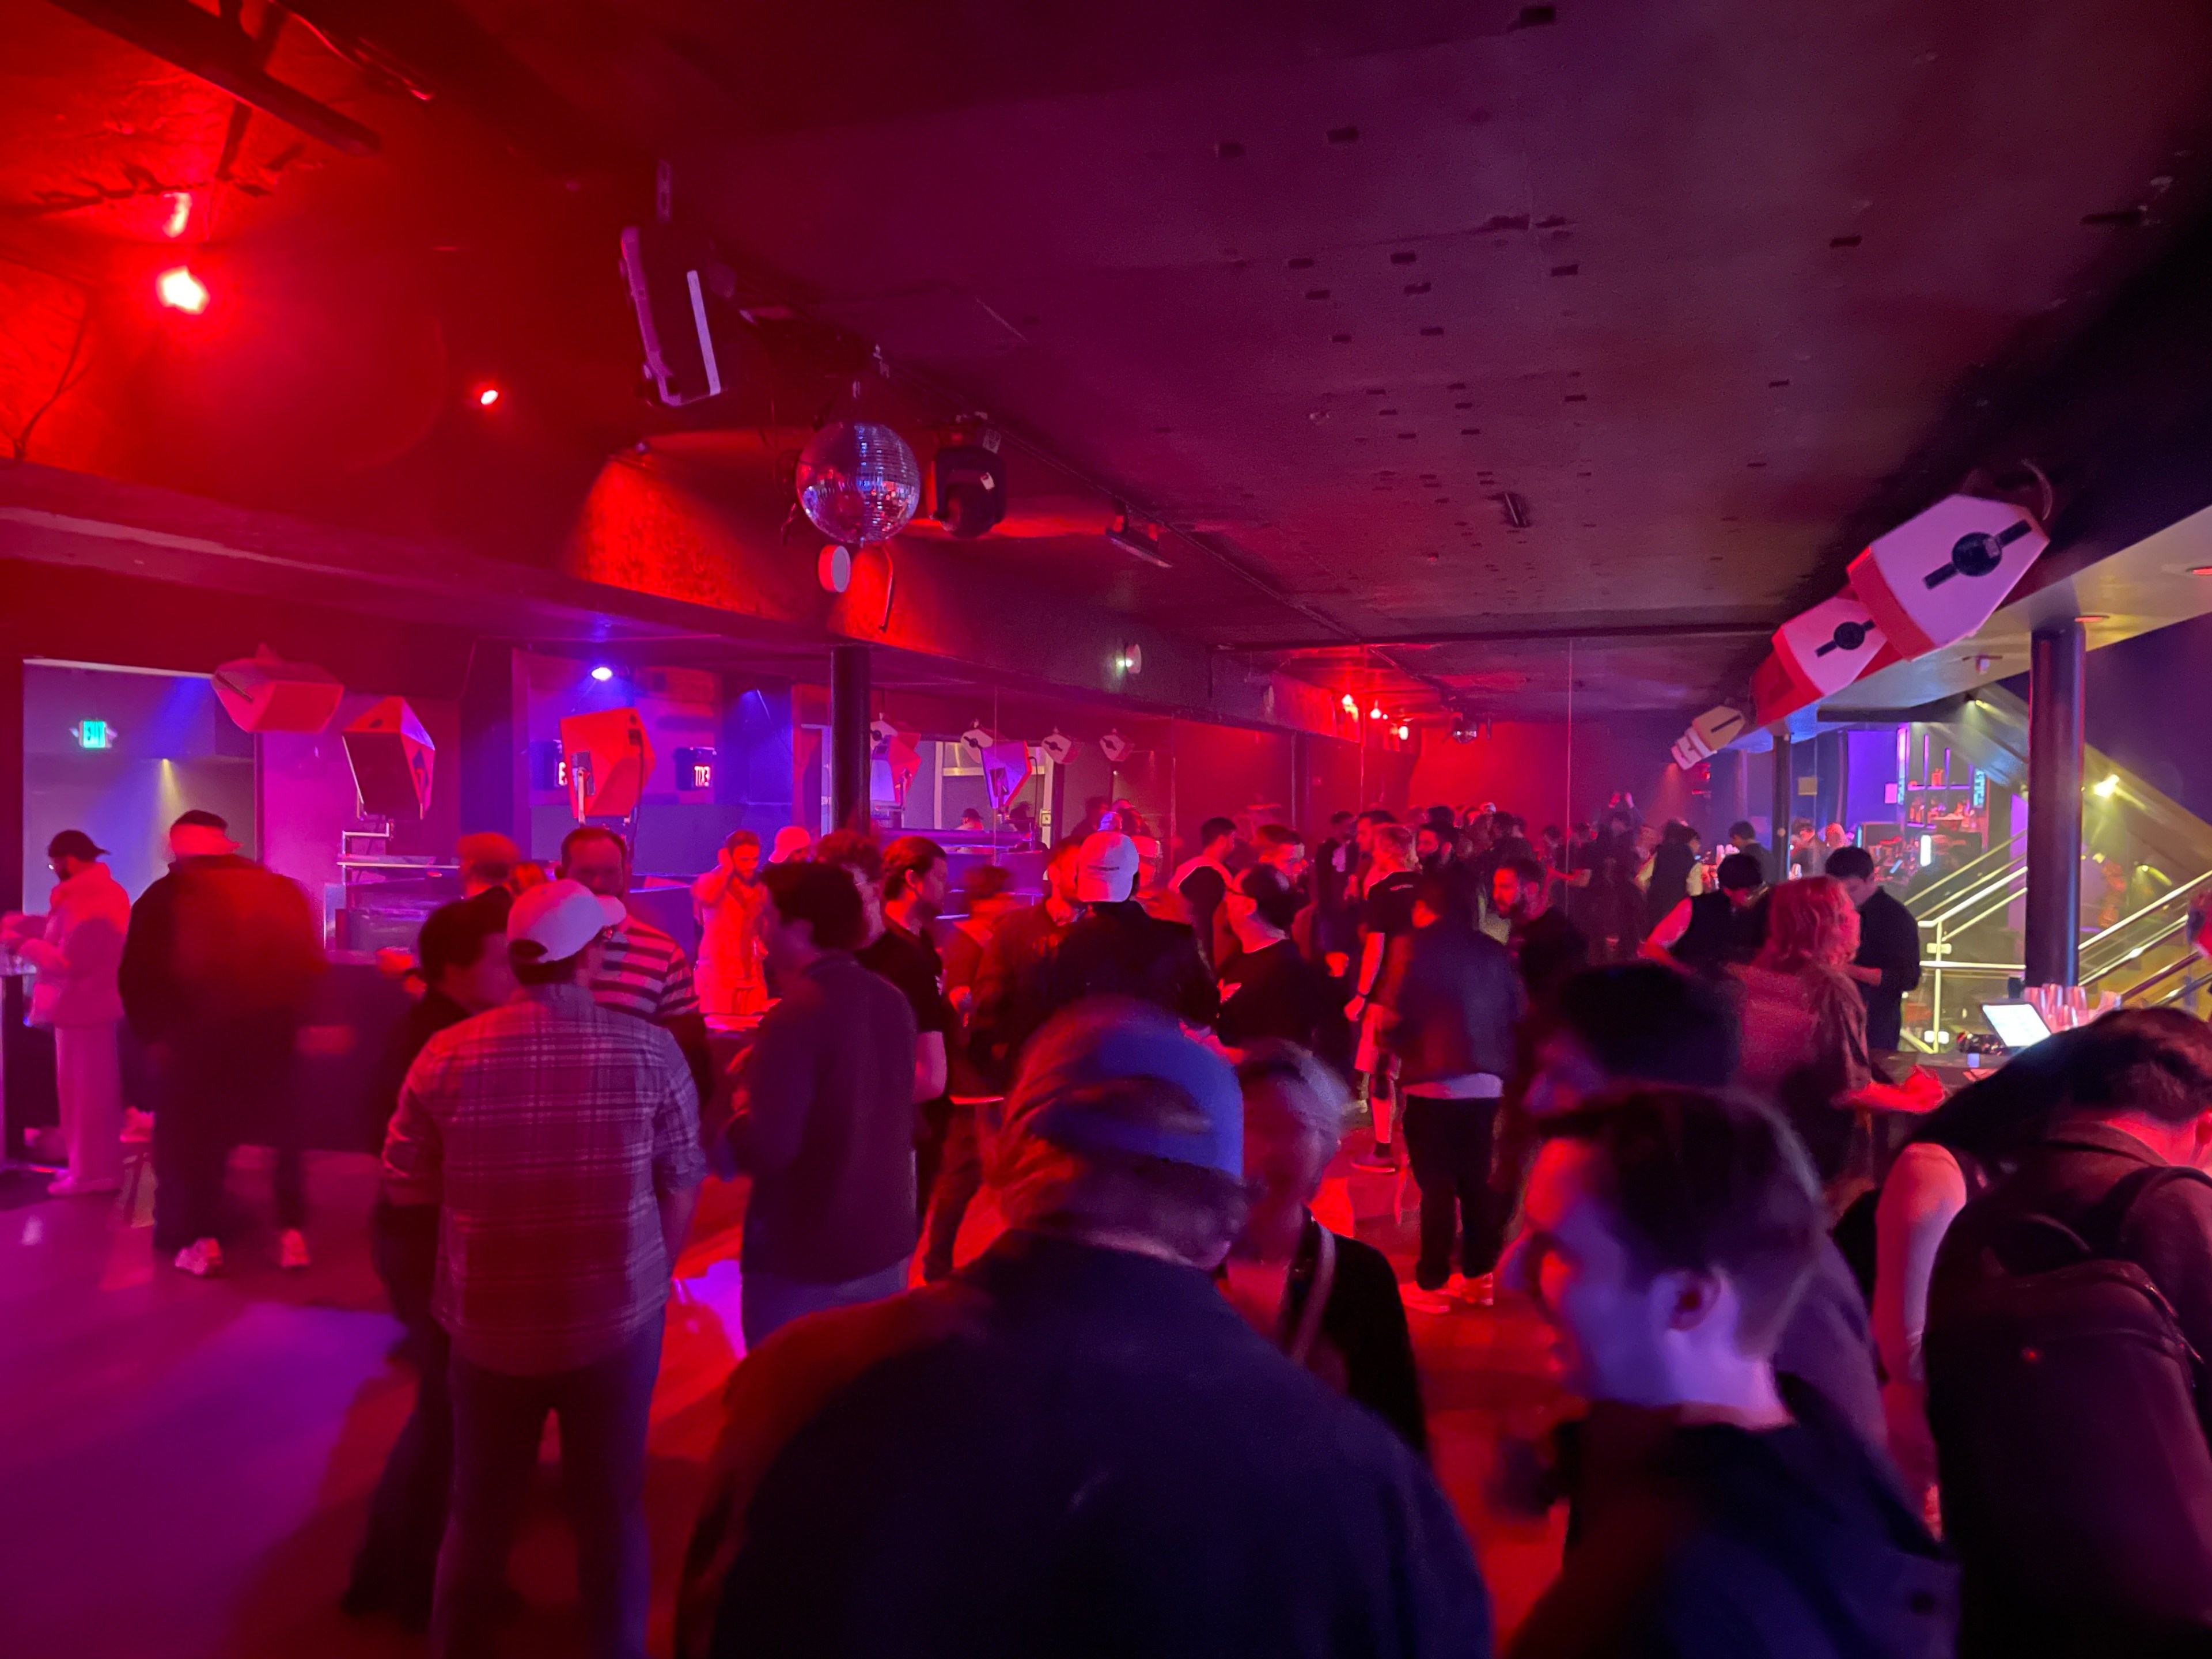 A large crowd of more than 100 people are seen standing with their backs turned and bathed in red and blue lights near a bar inside a nightclub with large speakers hanging overhead.